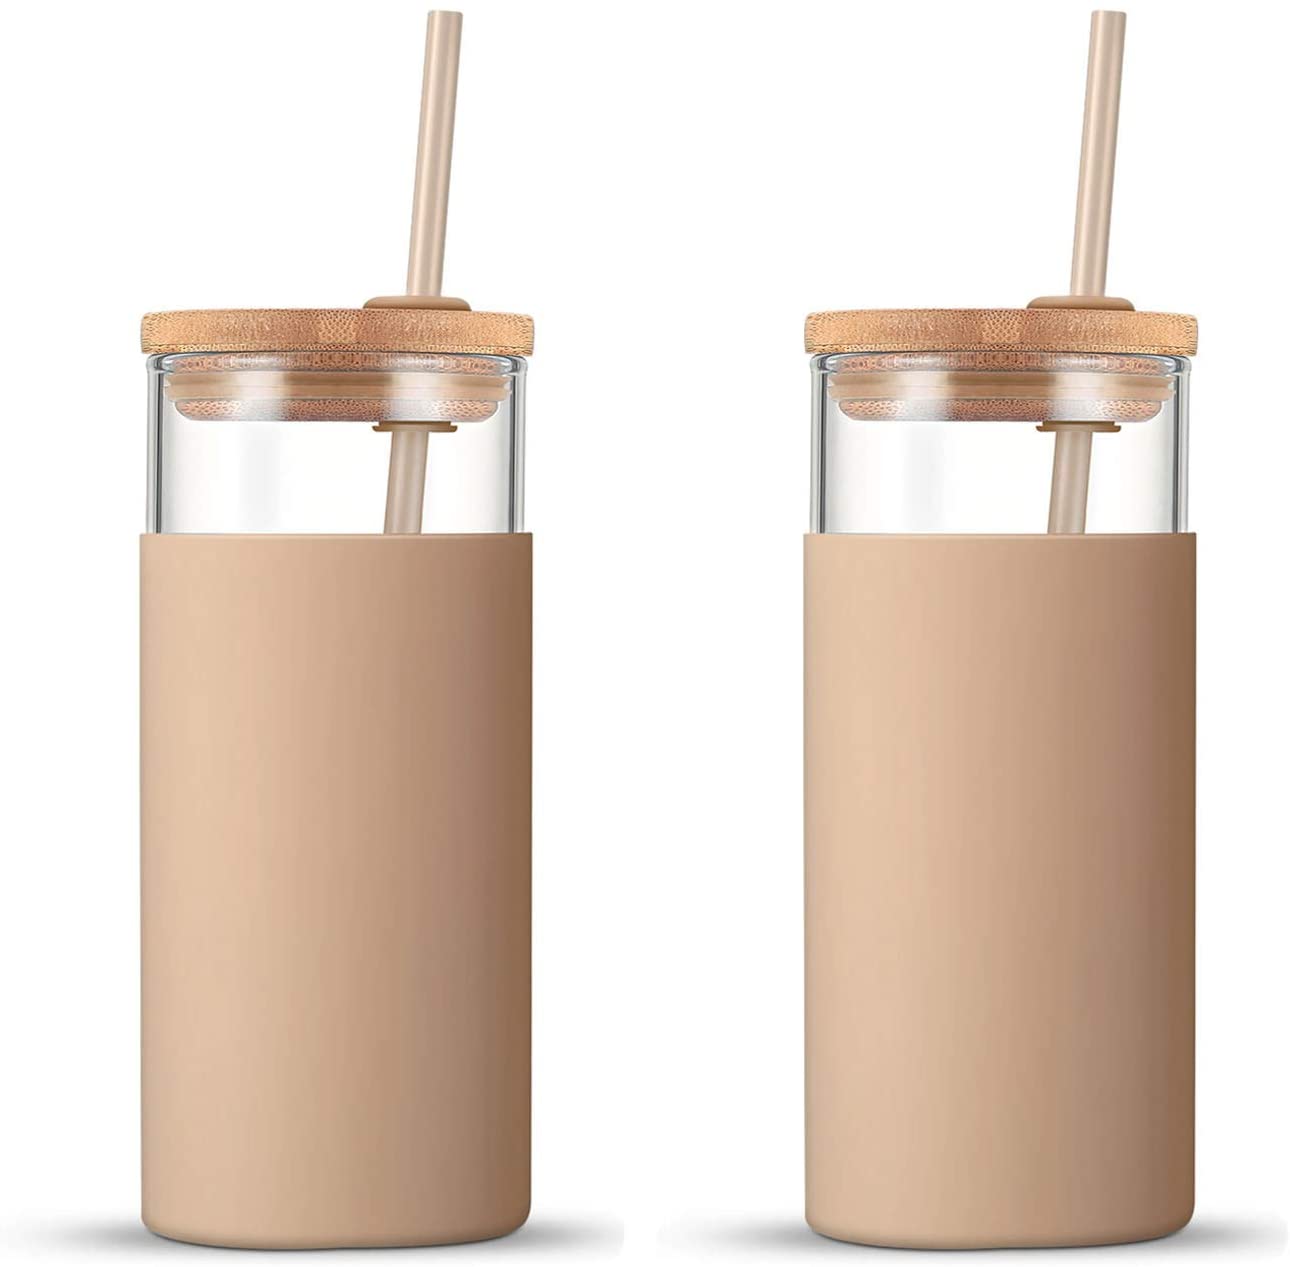 420/600ml Portable Drinking Cup Double-sided Drinkware Couple Cup